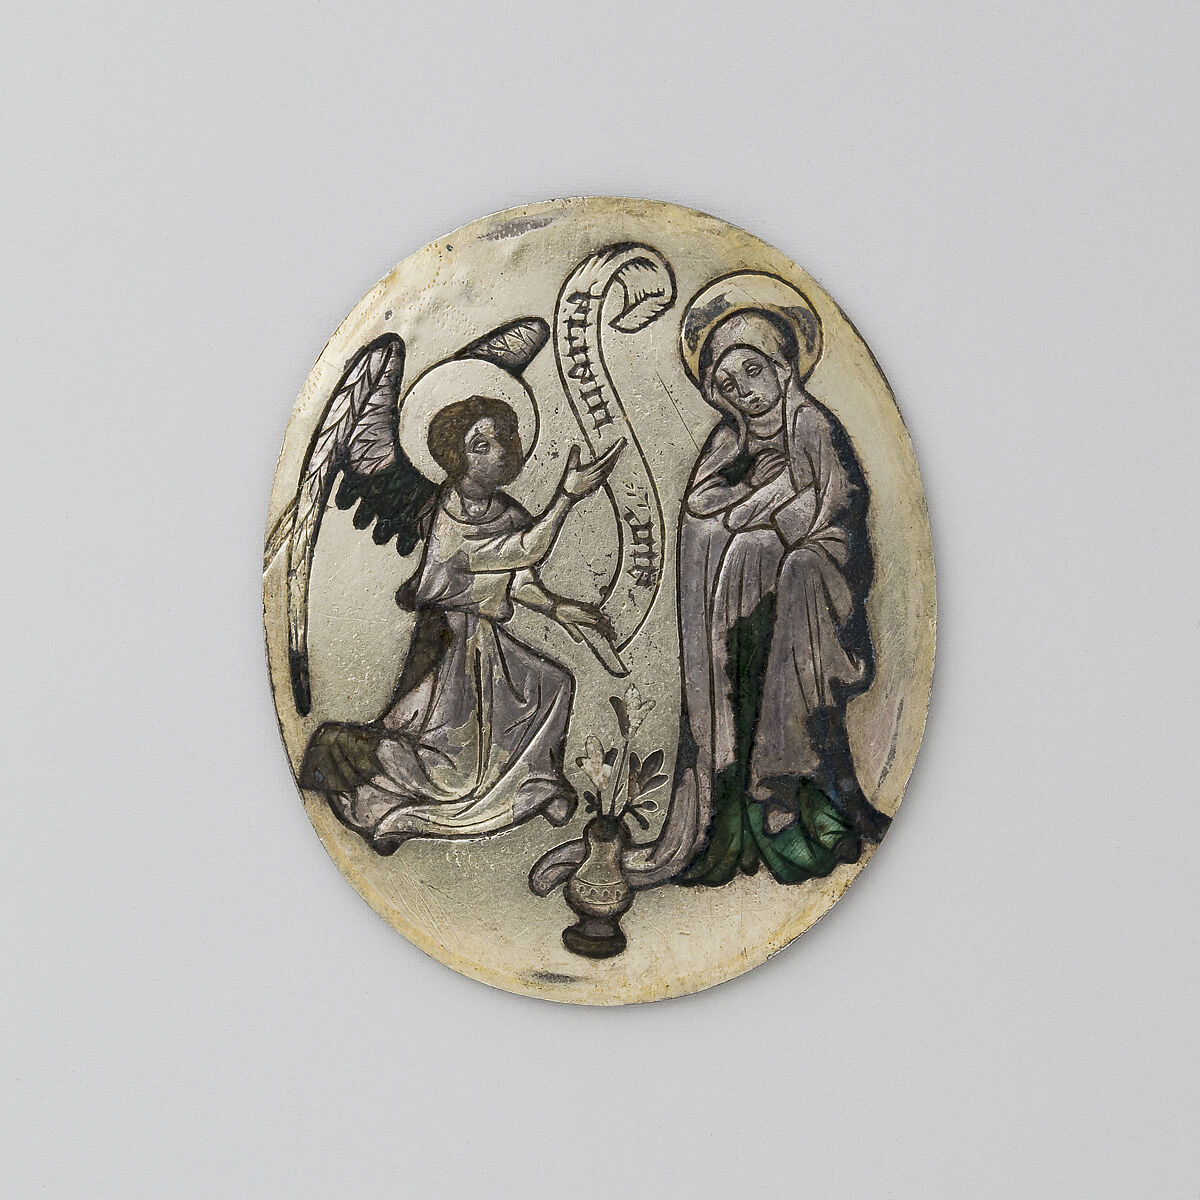 Enamel Plaque with the Annunciation, Silver with translucent and opaque enamels, South Netherlandish 